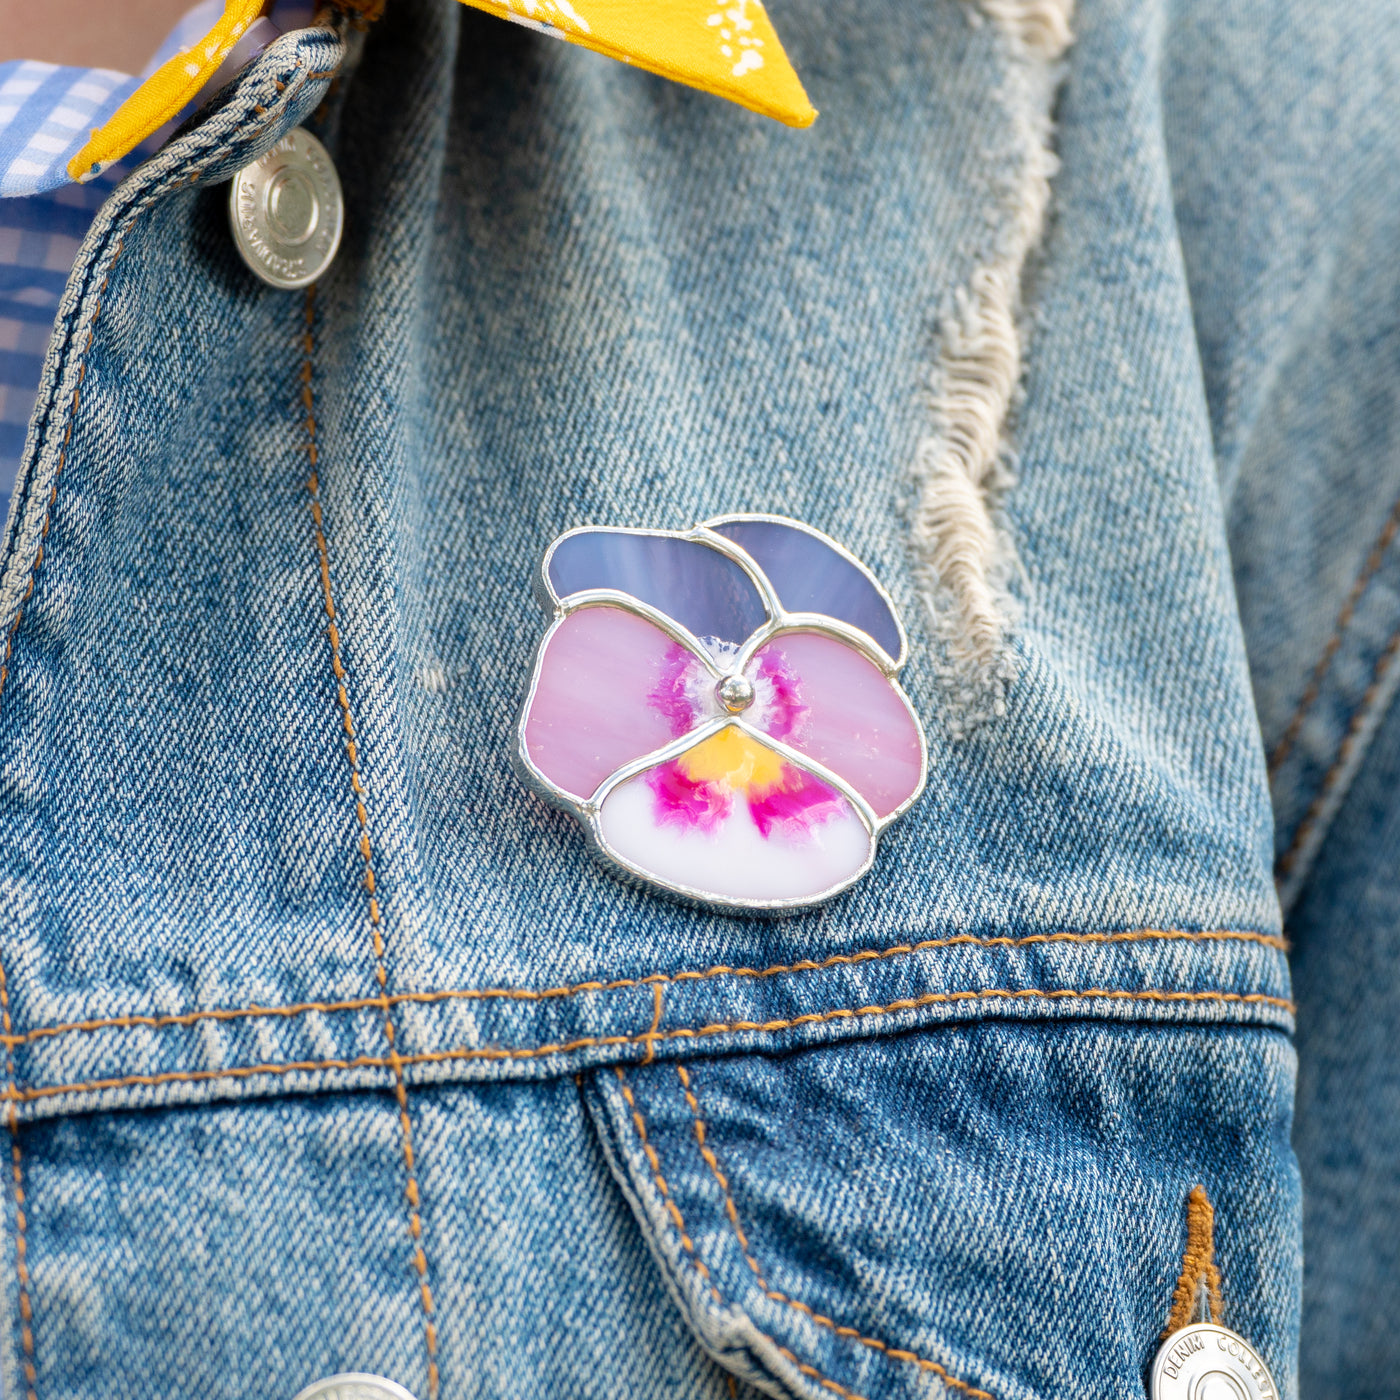 Stained glass pink pansy brooch on a jeans jacket